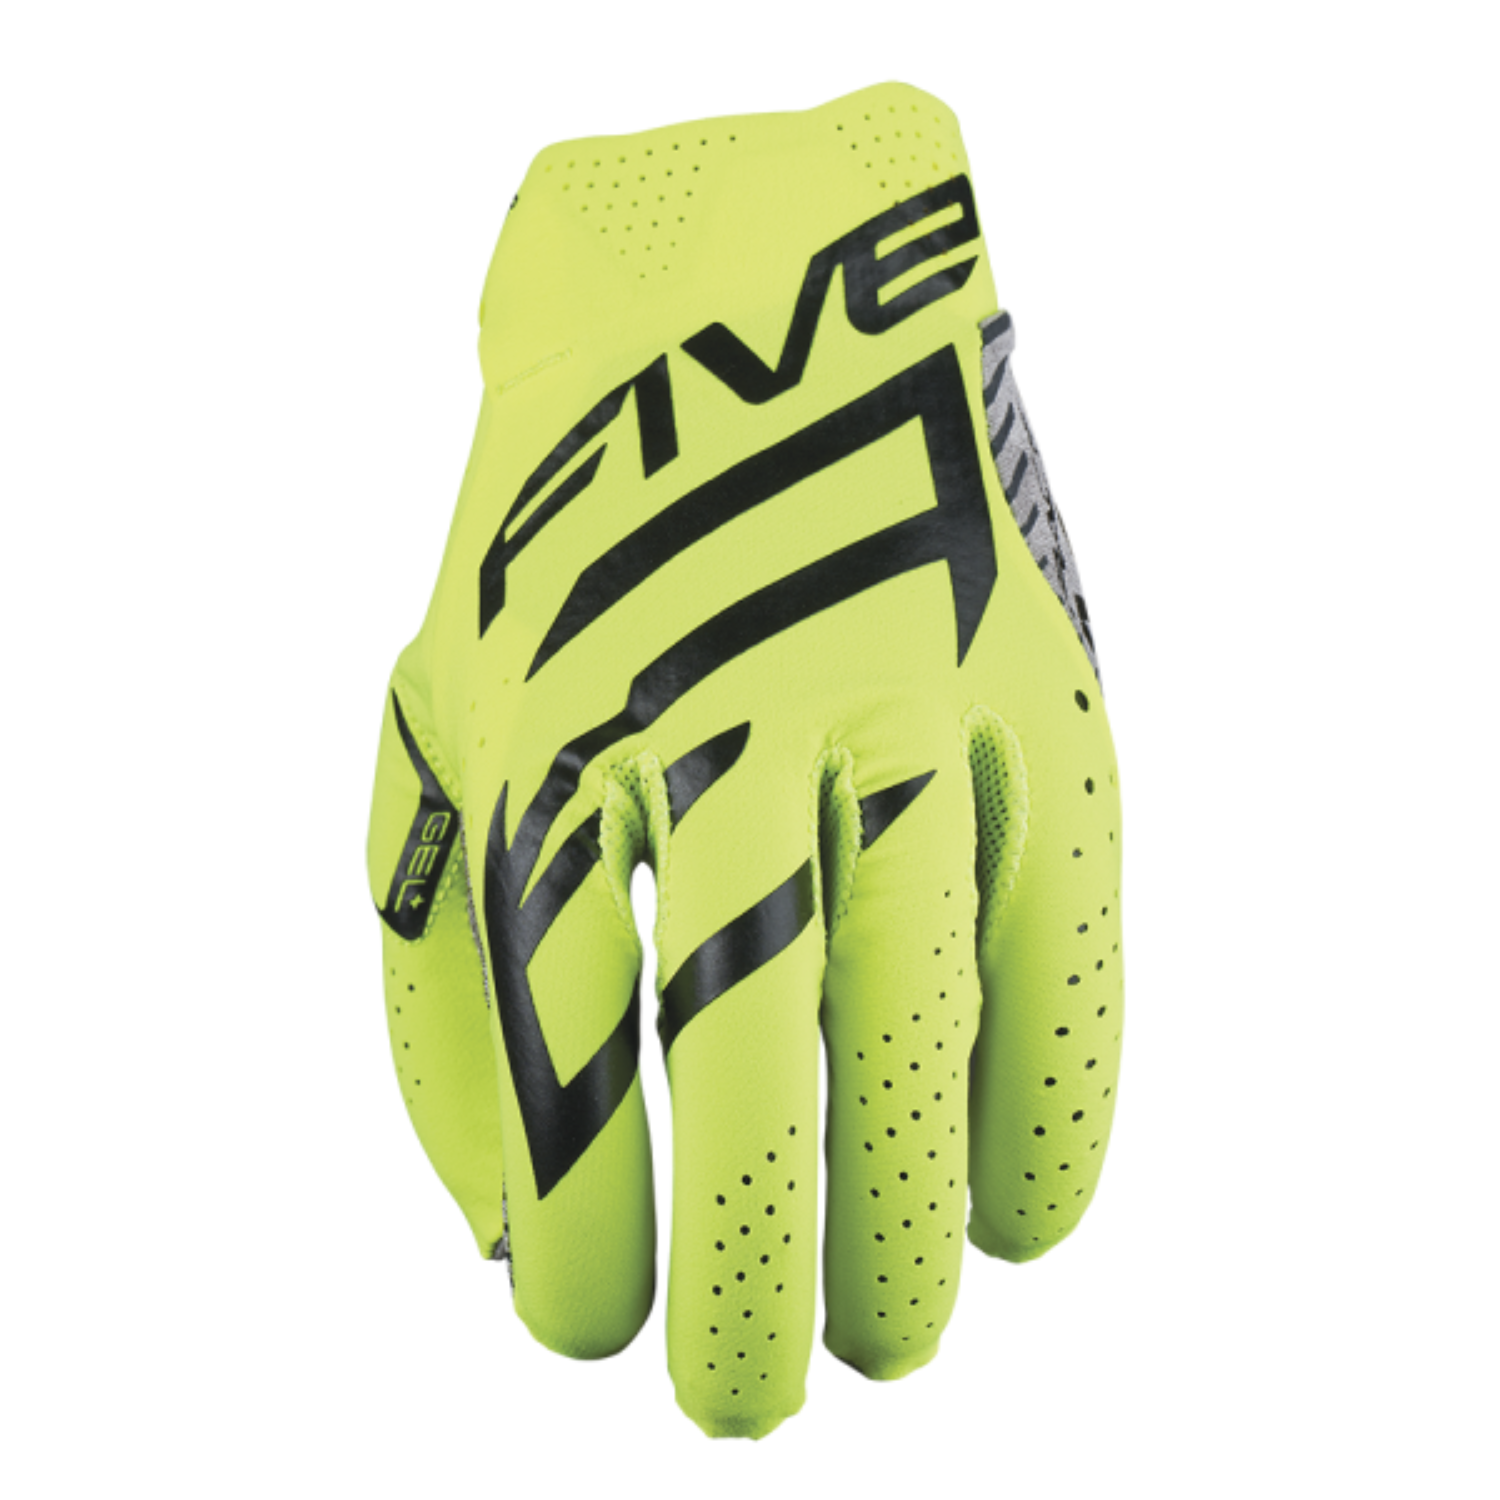 Five MXF Race Gloves Fluorescent Yellow Size L